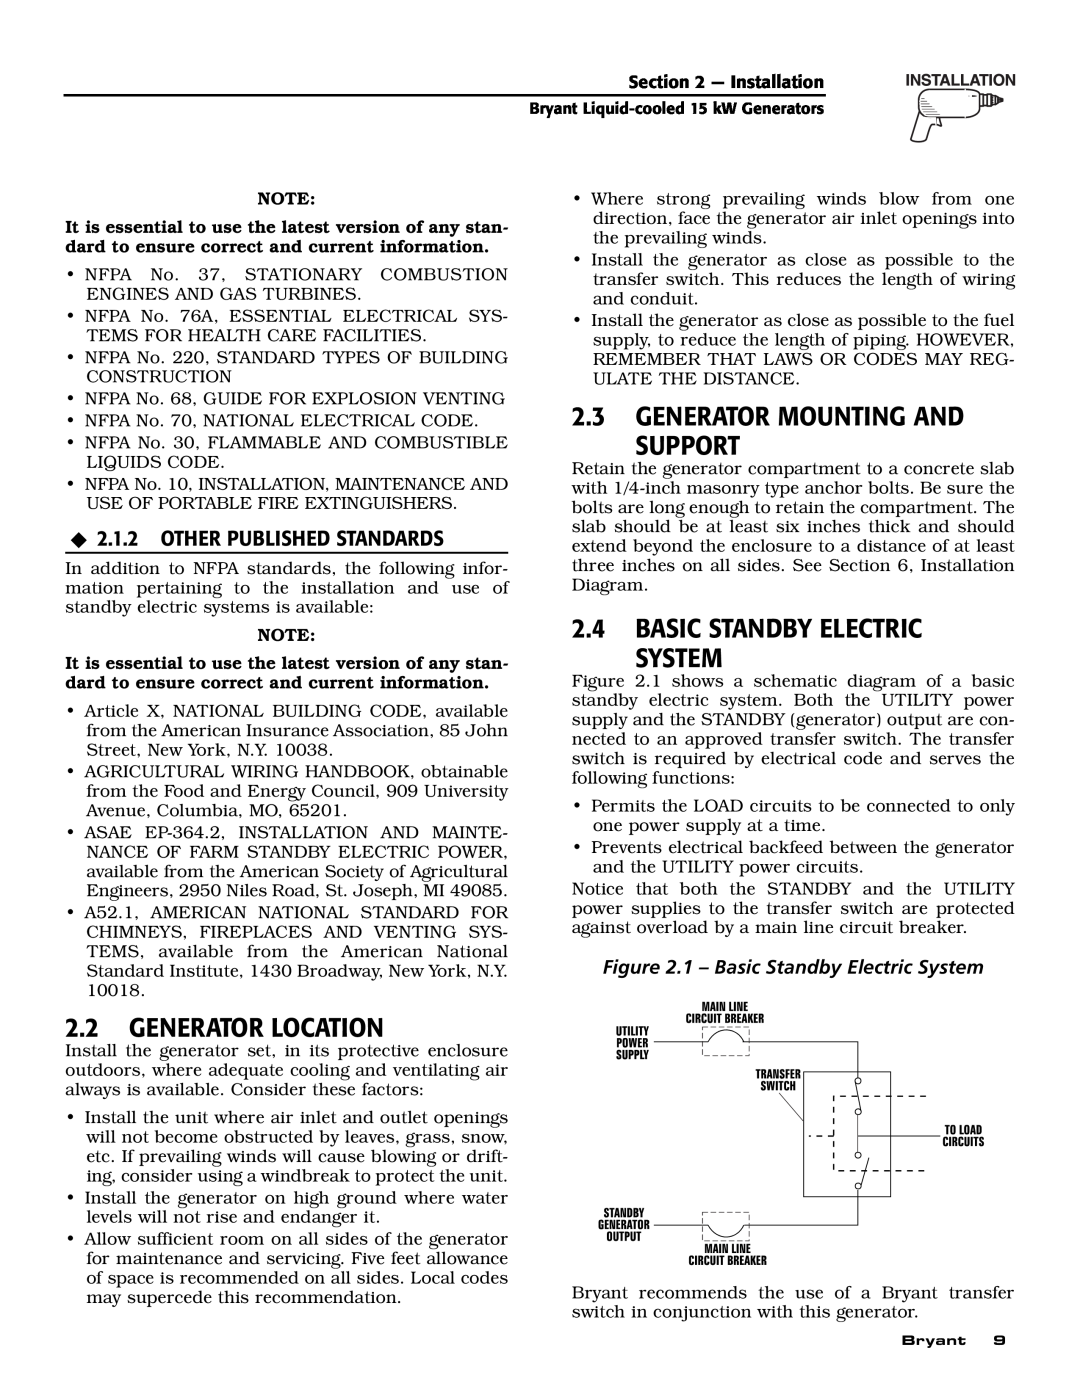 Bryant ASPAS1BBL015 owner manual 2.3GENERATOR MOUNTING AND SUPPORT, 2.4BASIC STANDBY ELECTRIC SYSTEM, 2.2GENERATOR LOCATION 